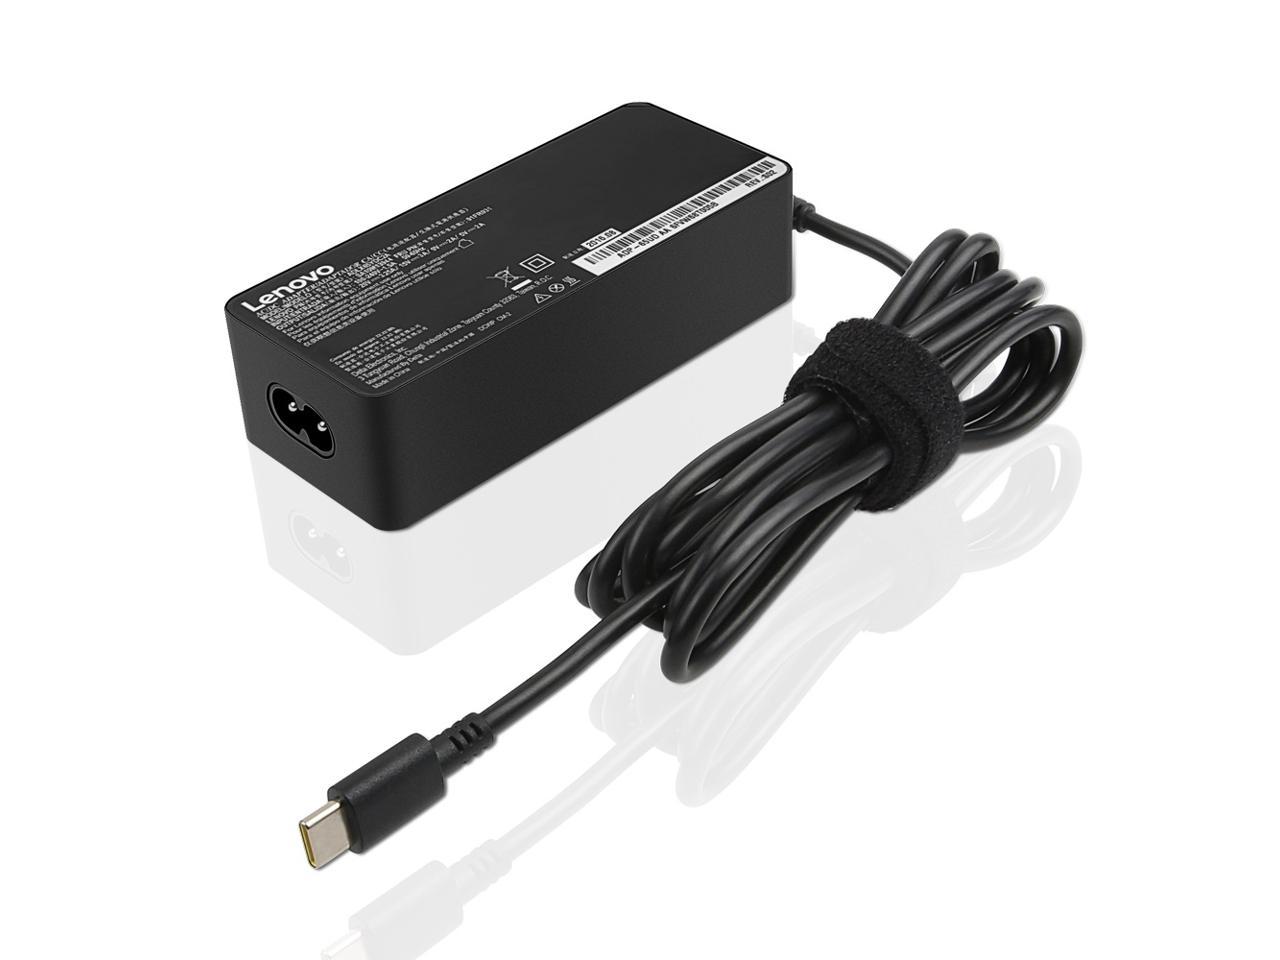 POWER ADAPTER-AC POWER ADAPTERS